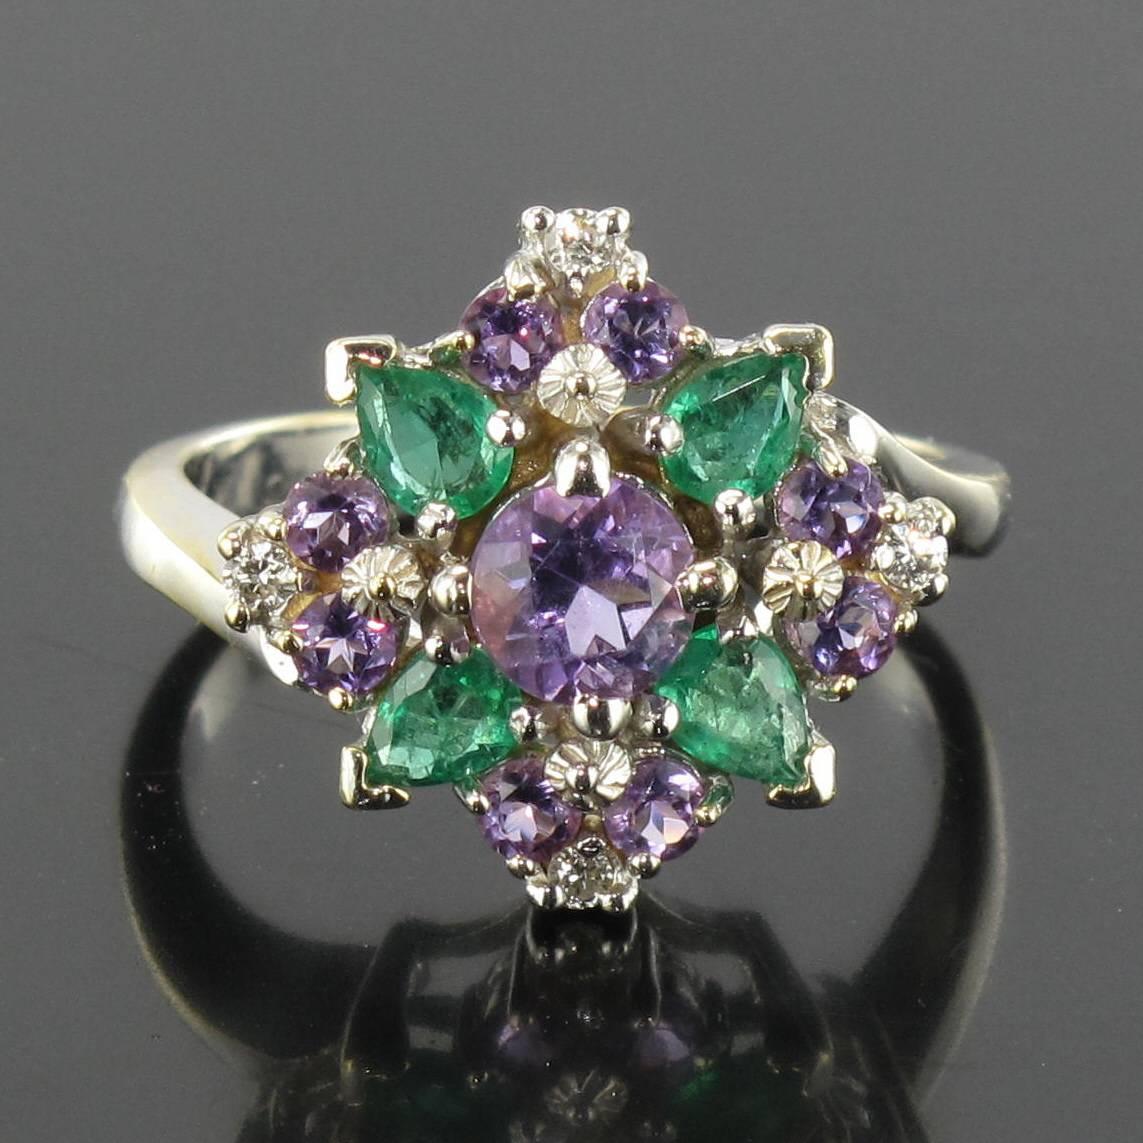 Ring in 18 carat white gold. 

This striking antique white gold ring is set with a central round amethyst surrounded by 4 marquise cut emeralds, 8 round amethysts and 4 brilliant cut diamonds set at the compass points. 

Height: 1.57 cm, width: